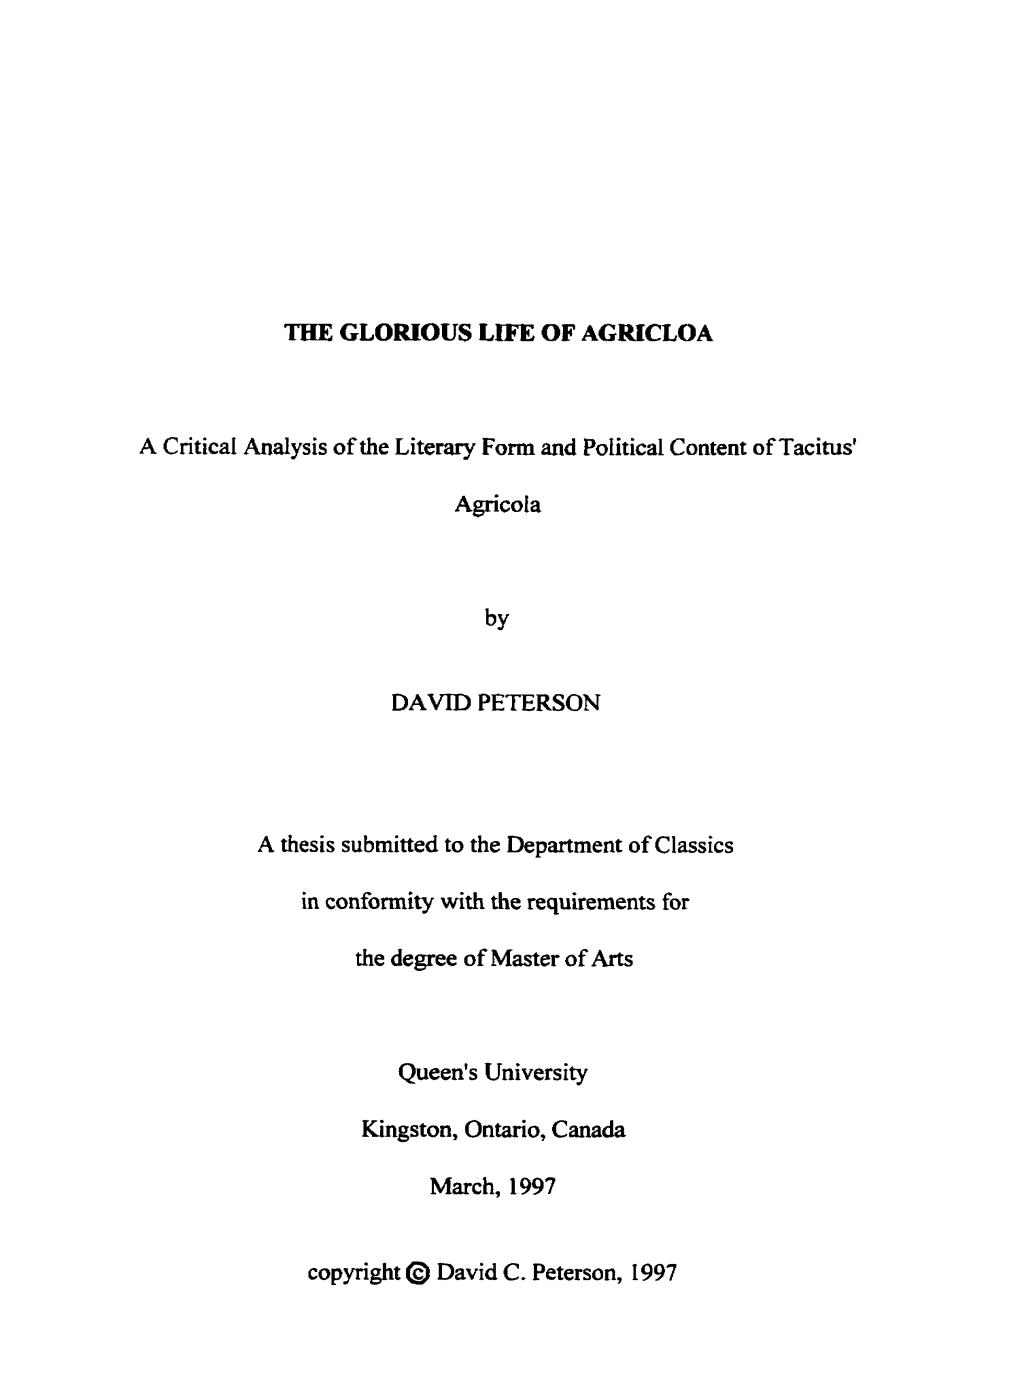 THE GLORIOUS LIFE of AGIUCLOA a Critical Analysis of the Literary Form and Political Content of Tacitus' by DAVID PETERSON in Co